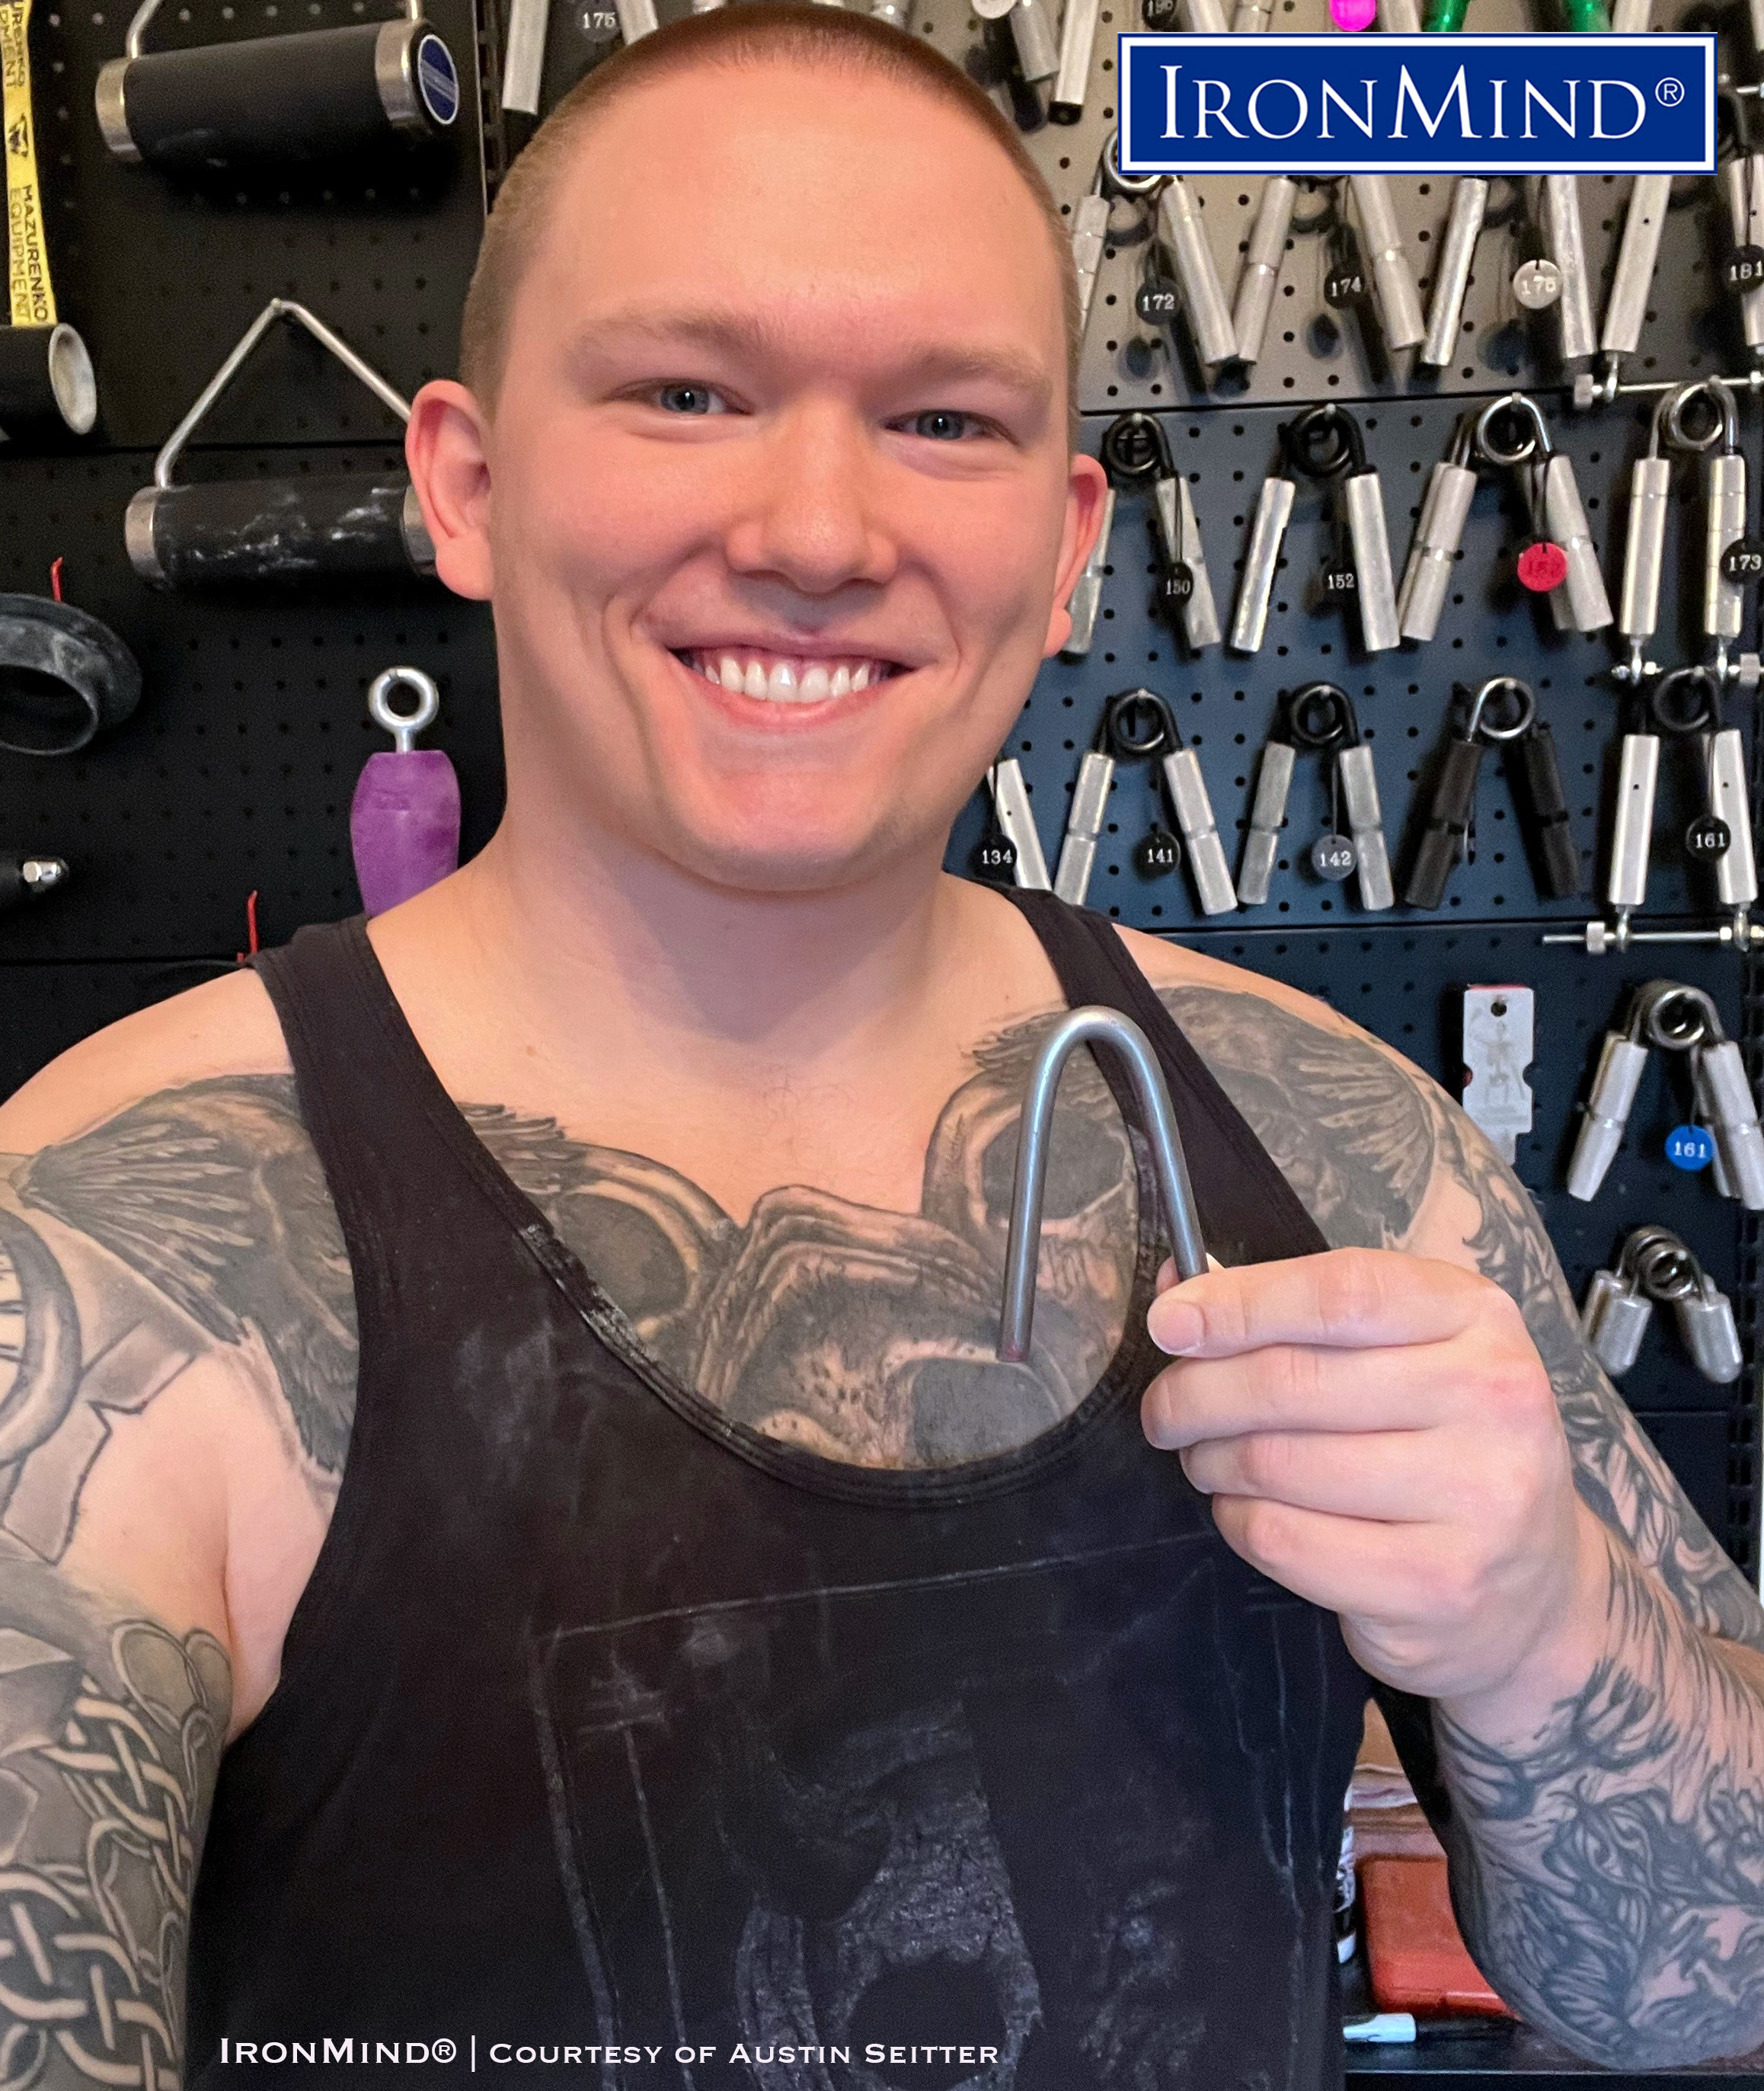 Austin Seitter (28, 6’ 2”, 298 lb.) has been certified on the IronMind Red Nail, a benchmark steel bend known worldwide since 1995. IronMind® | Courtesy of Austin Seitter